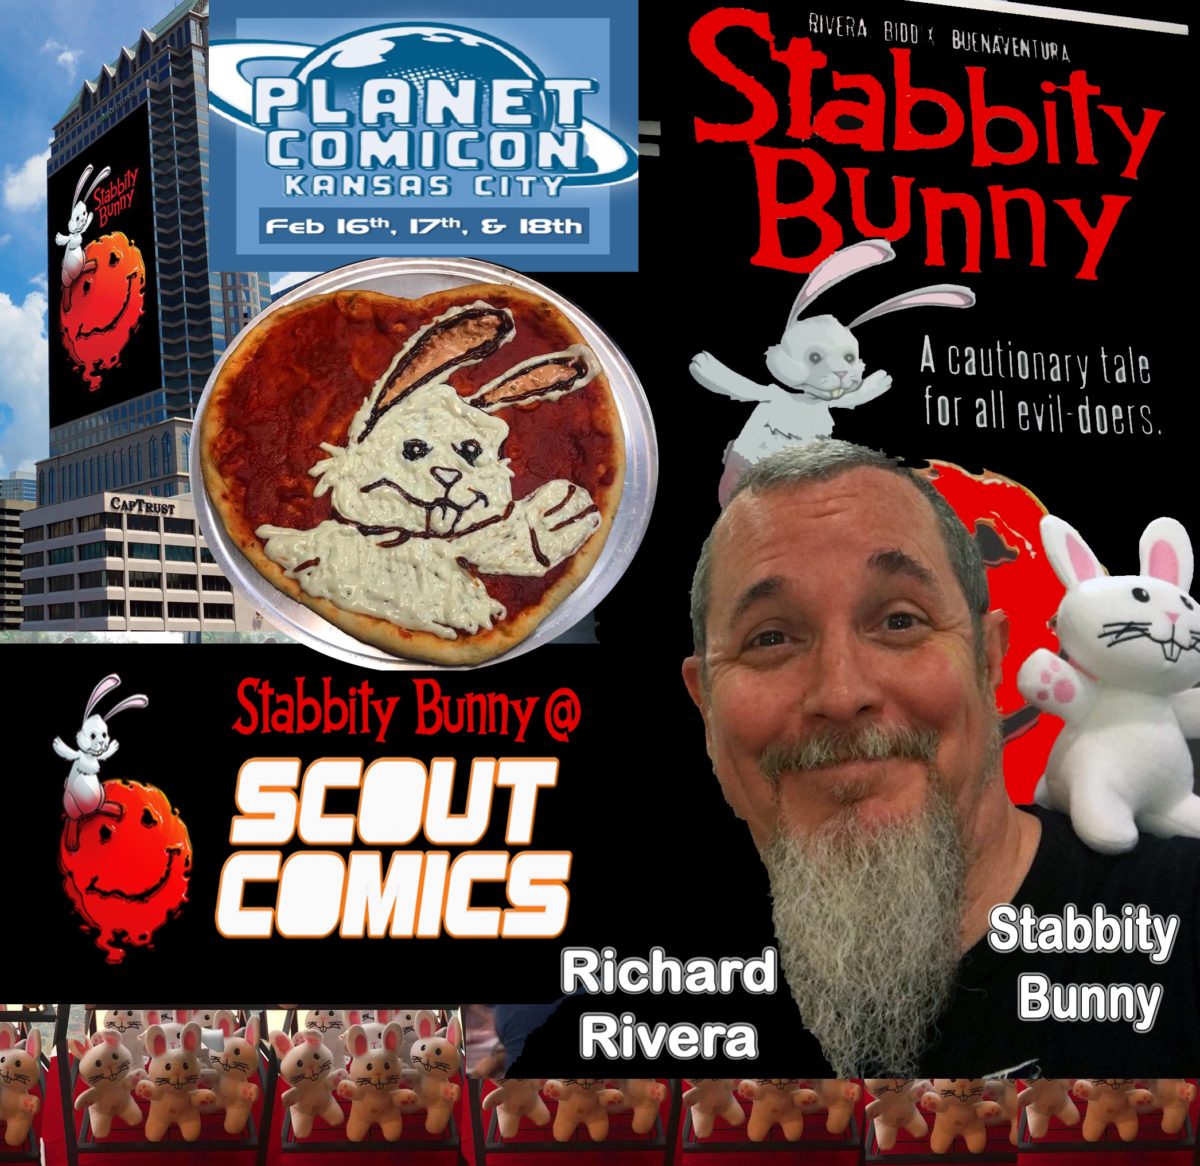 -MO- Planetcomicon.com will be a STABBITY EVENT